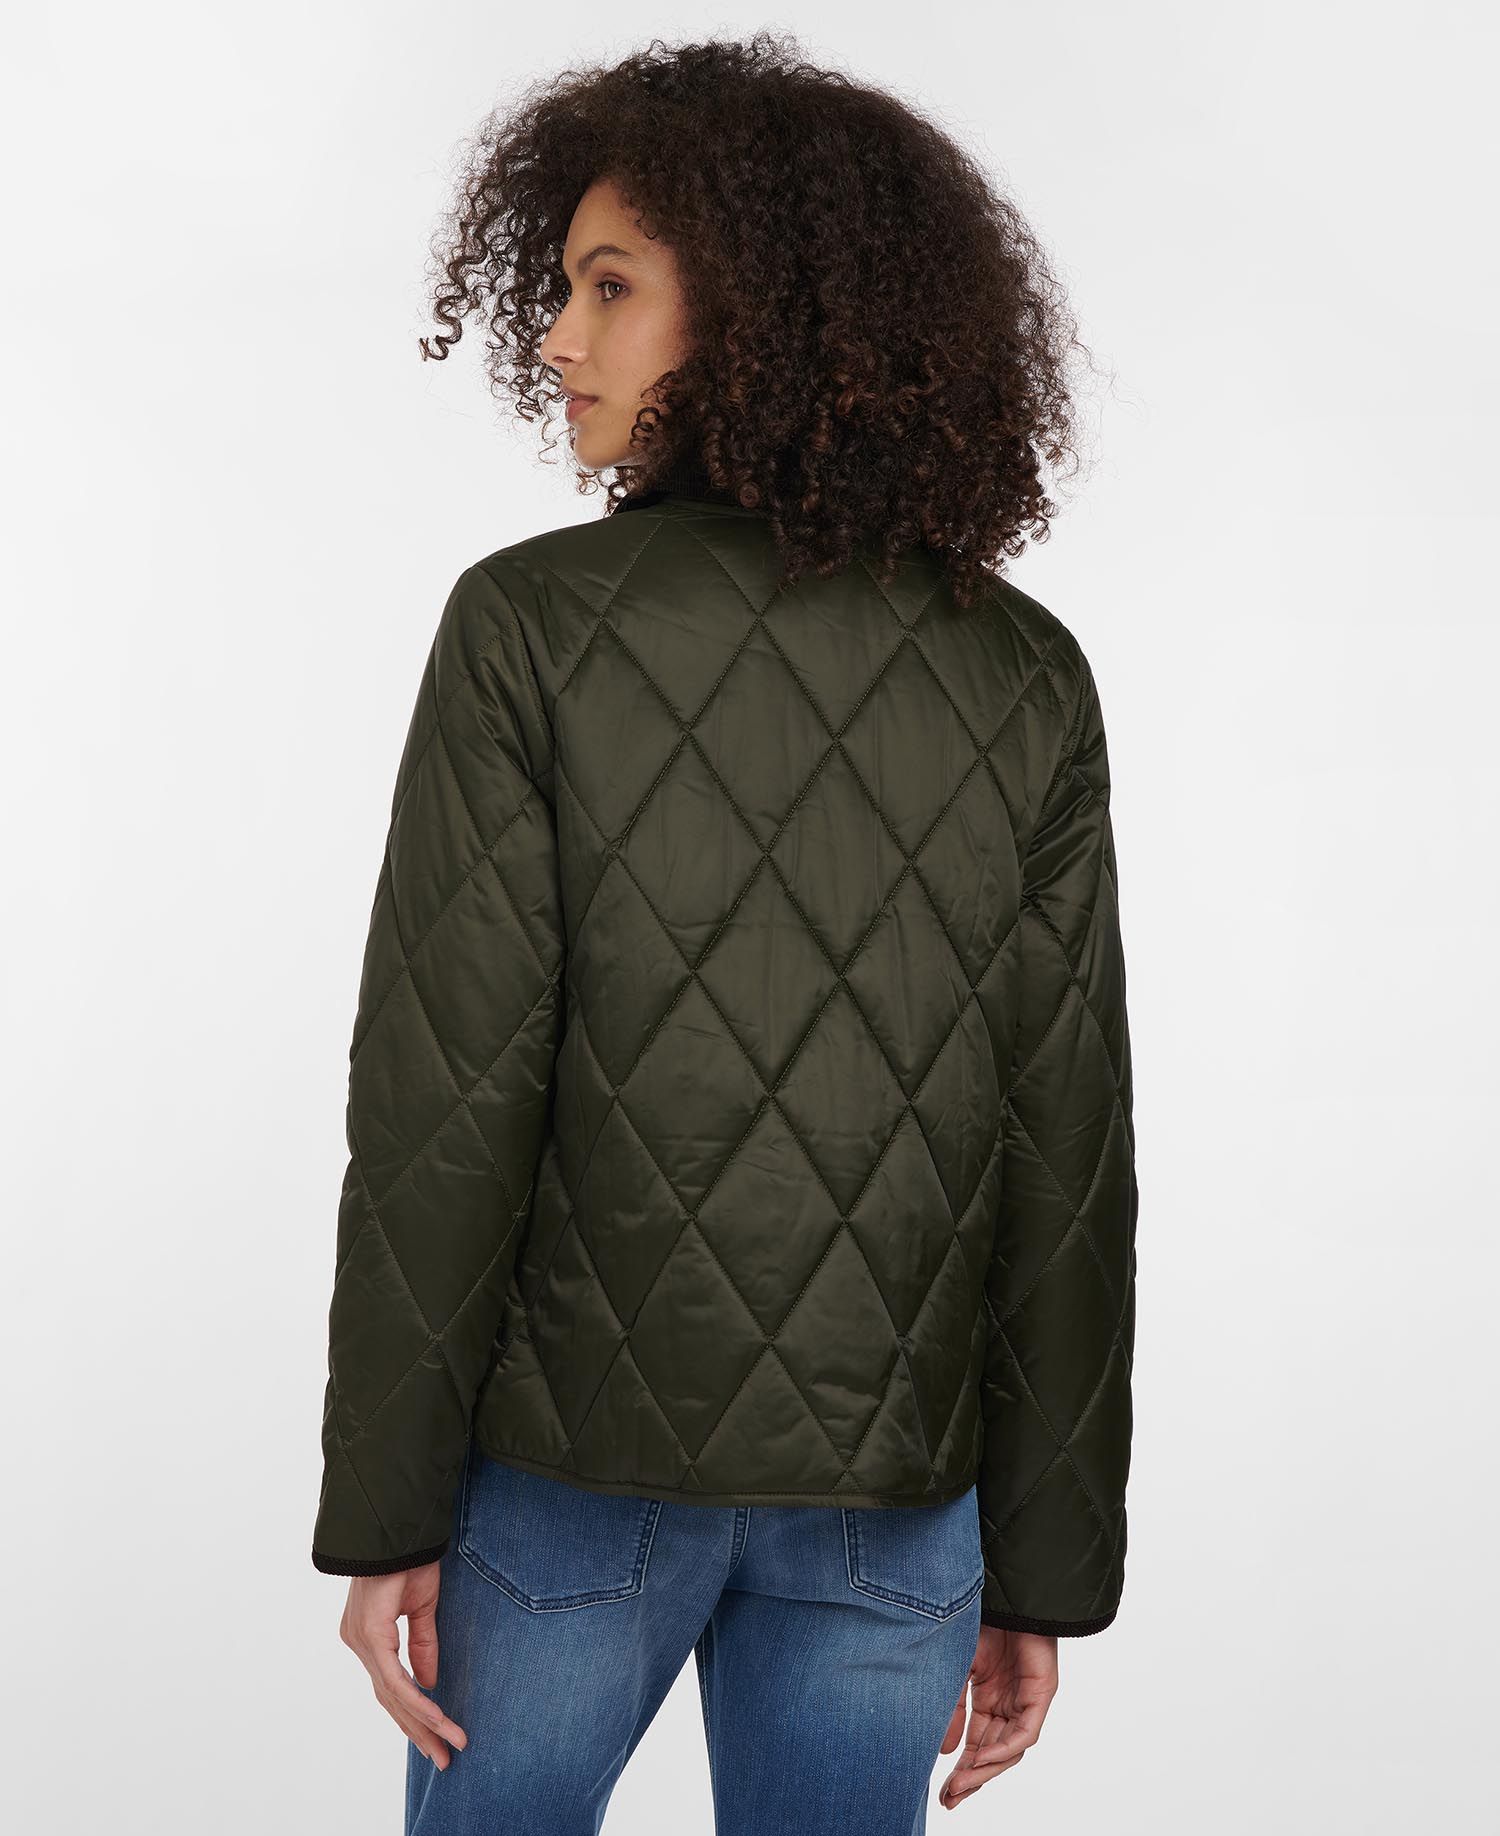 Barbour Linhope Quilted Jacket - Sage/Classic - 10 | Barbour